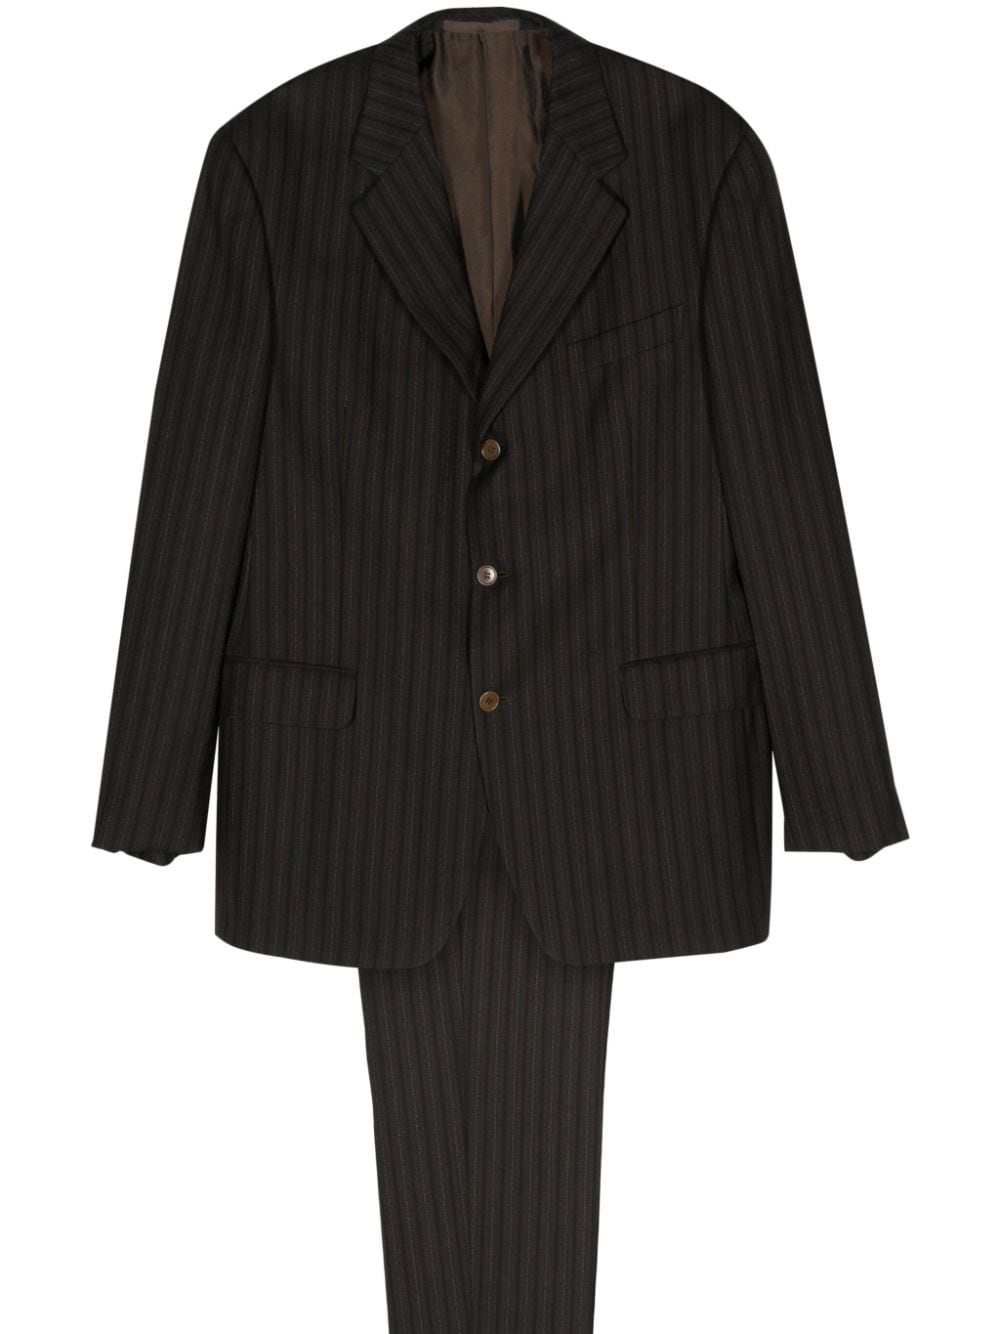 1990s striped single-breasted wool suit